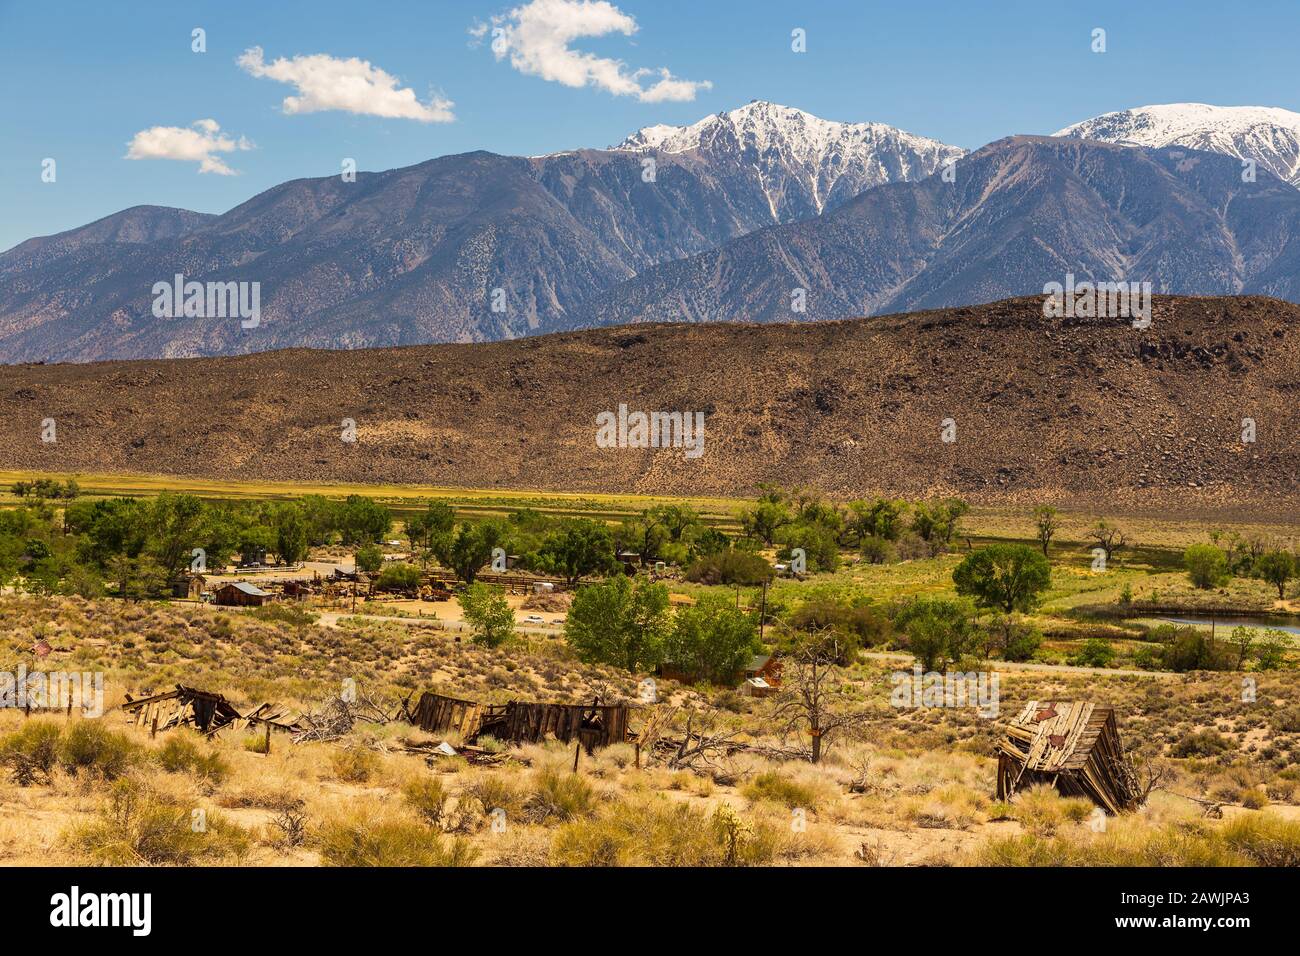 Old, wooden resort buildings next to hot springs. Snow-capped Sierra Nevada mountains in the background, Benton, California, USA. Stock Photo